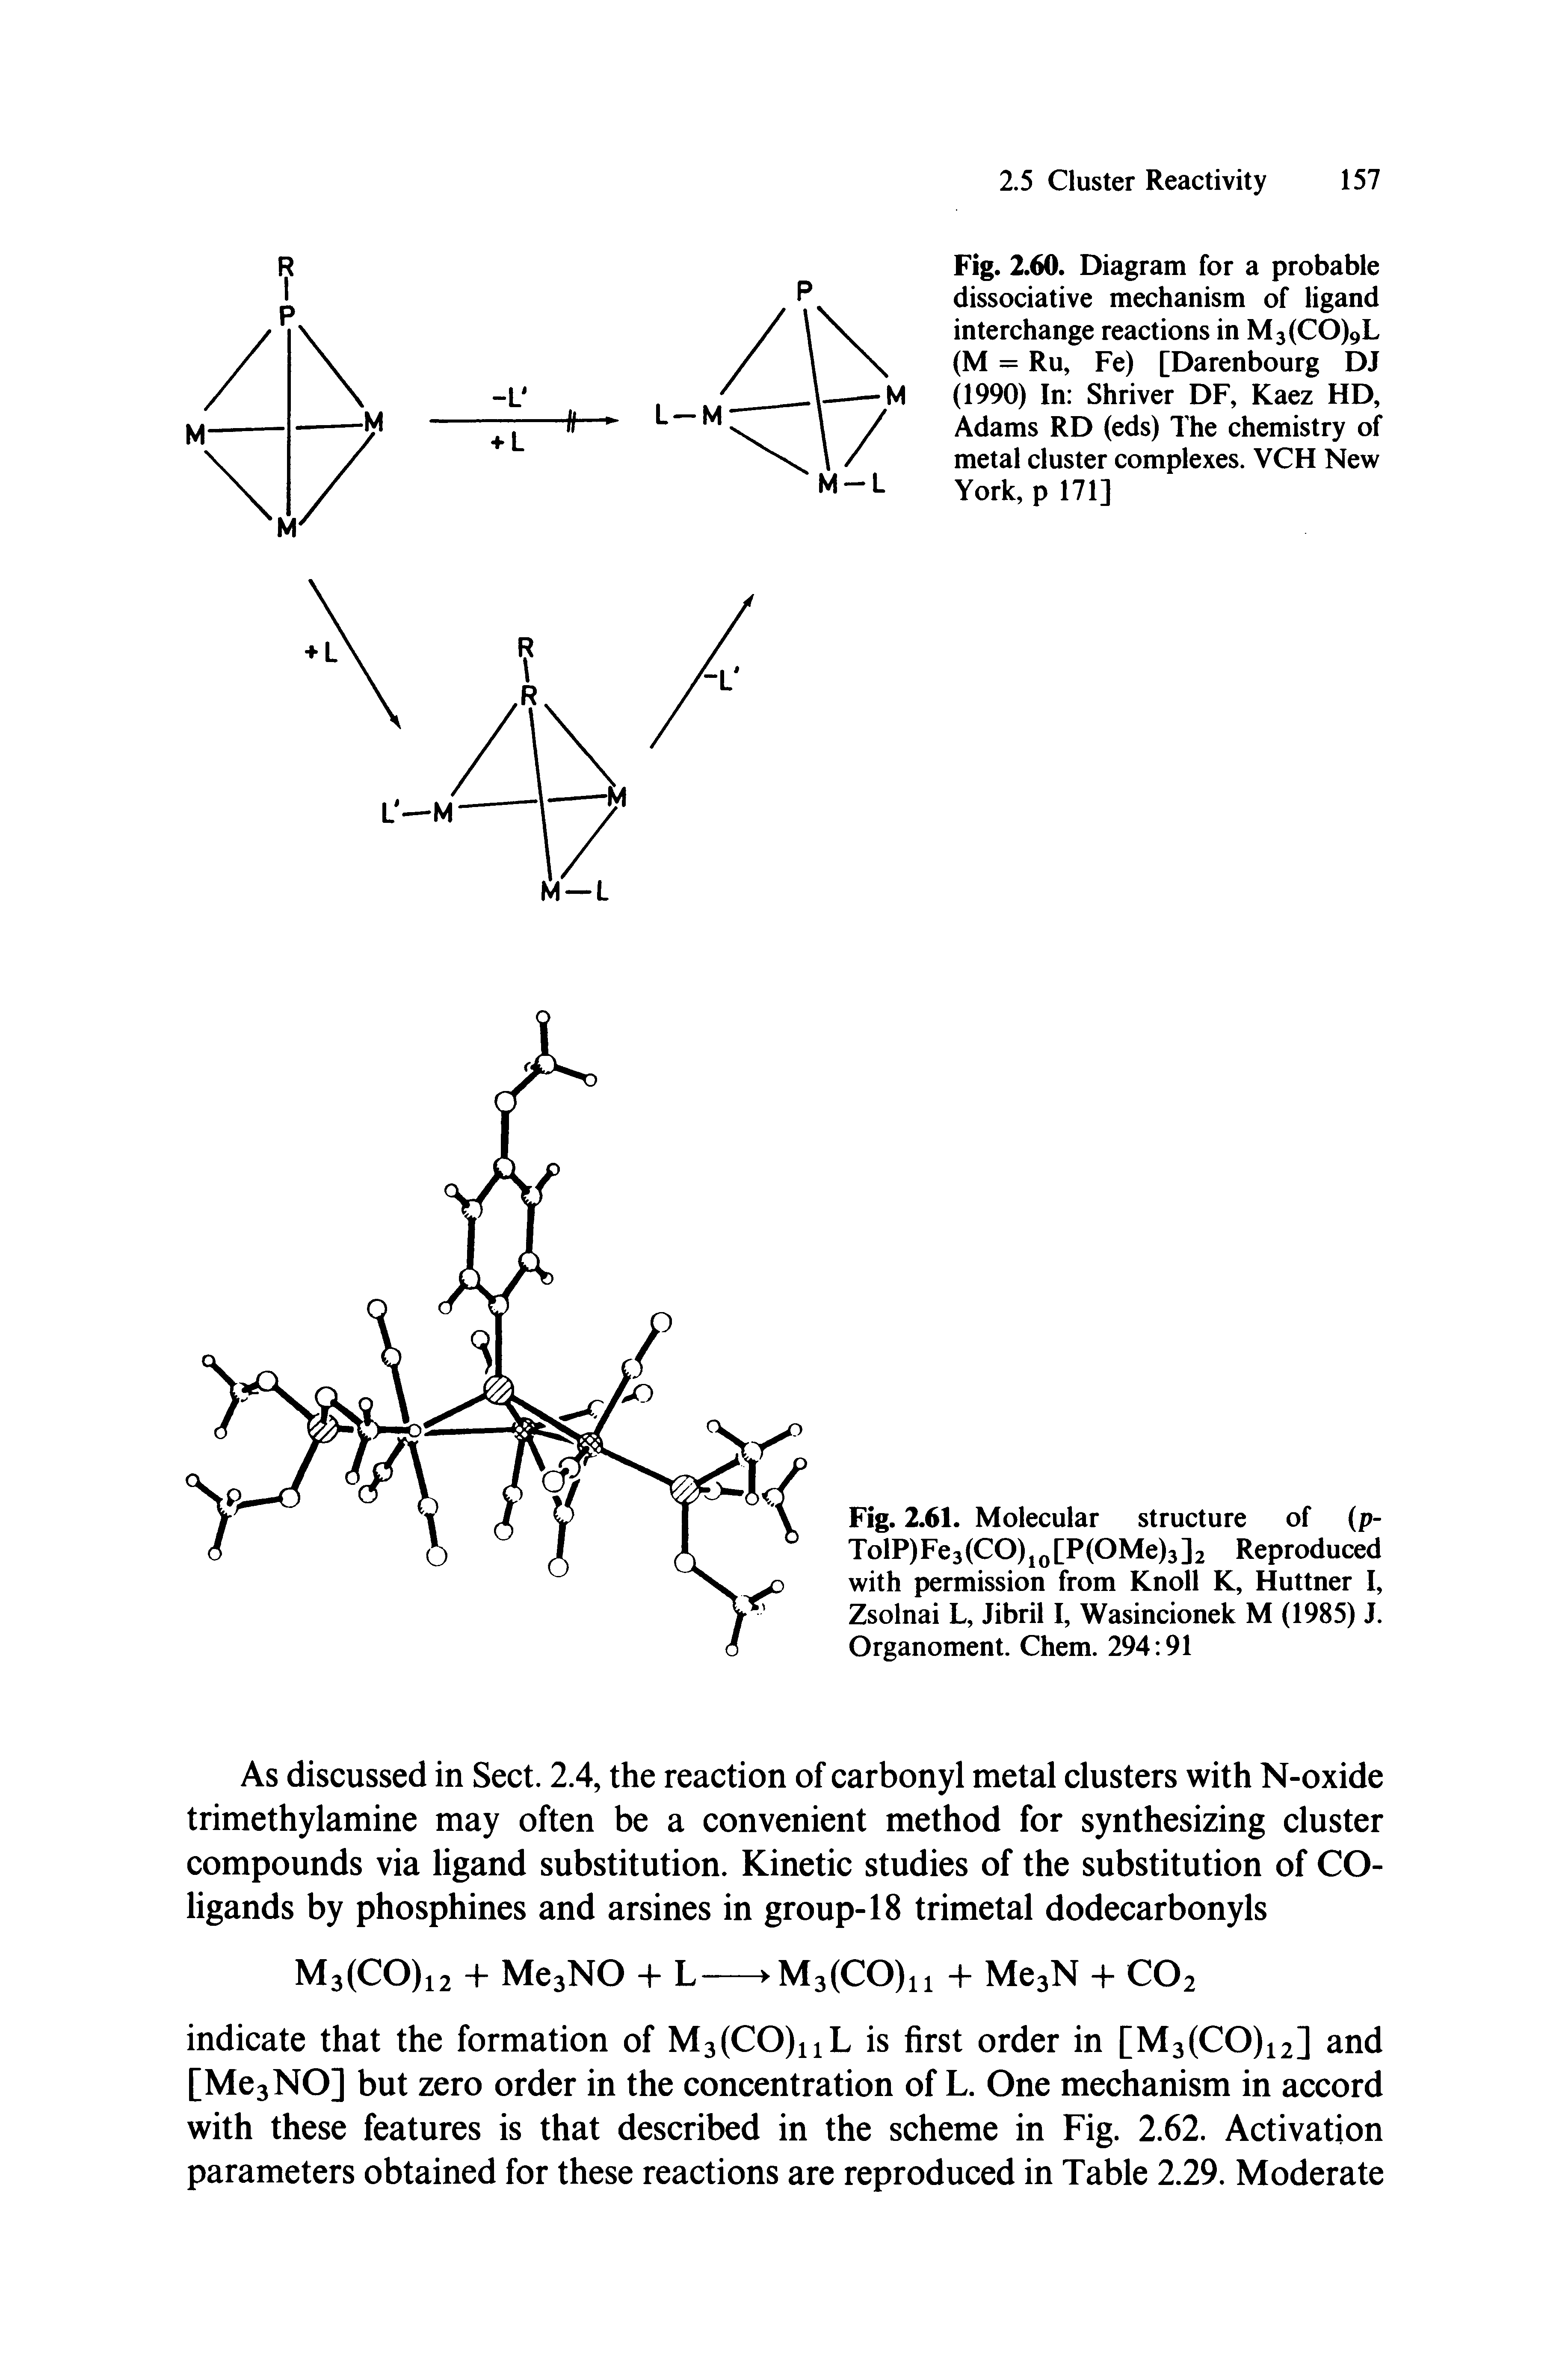 Fig. 2.60. Diagram for a probable dissociative mechanism of ligand interchange reactions in M3(CO)9L (M = Ru, Fe) [Darenbourg DJ (1990) In Shriver DF, Kaez HD, Adams RD (eds) The chemistry of metal cluster complexes. VCH New York, p 171]...